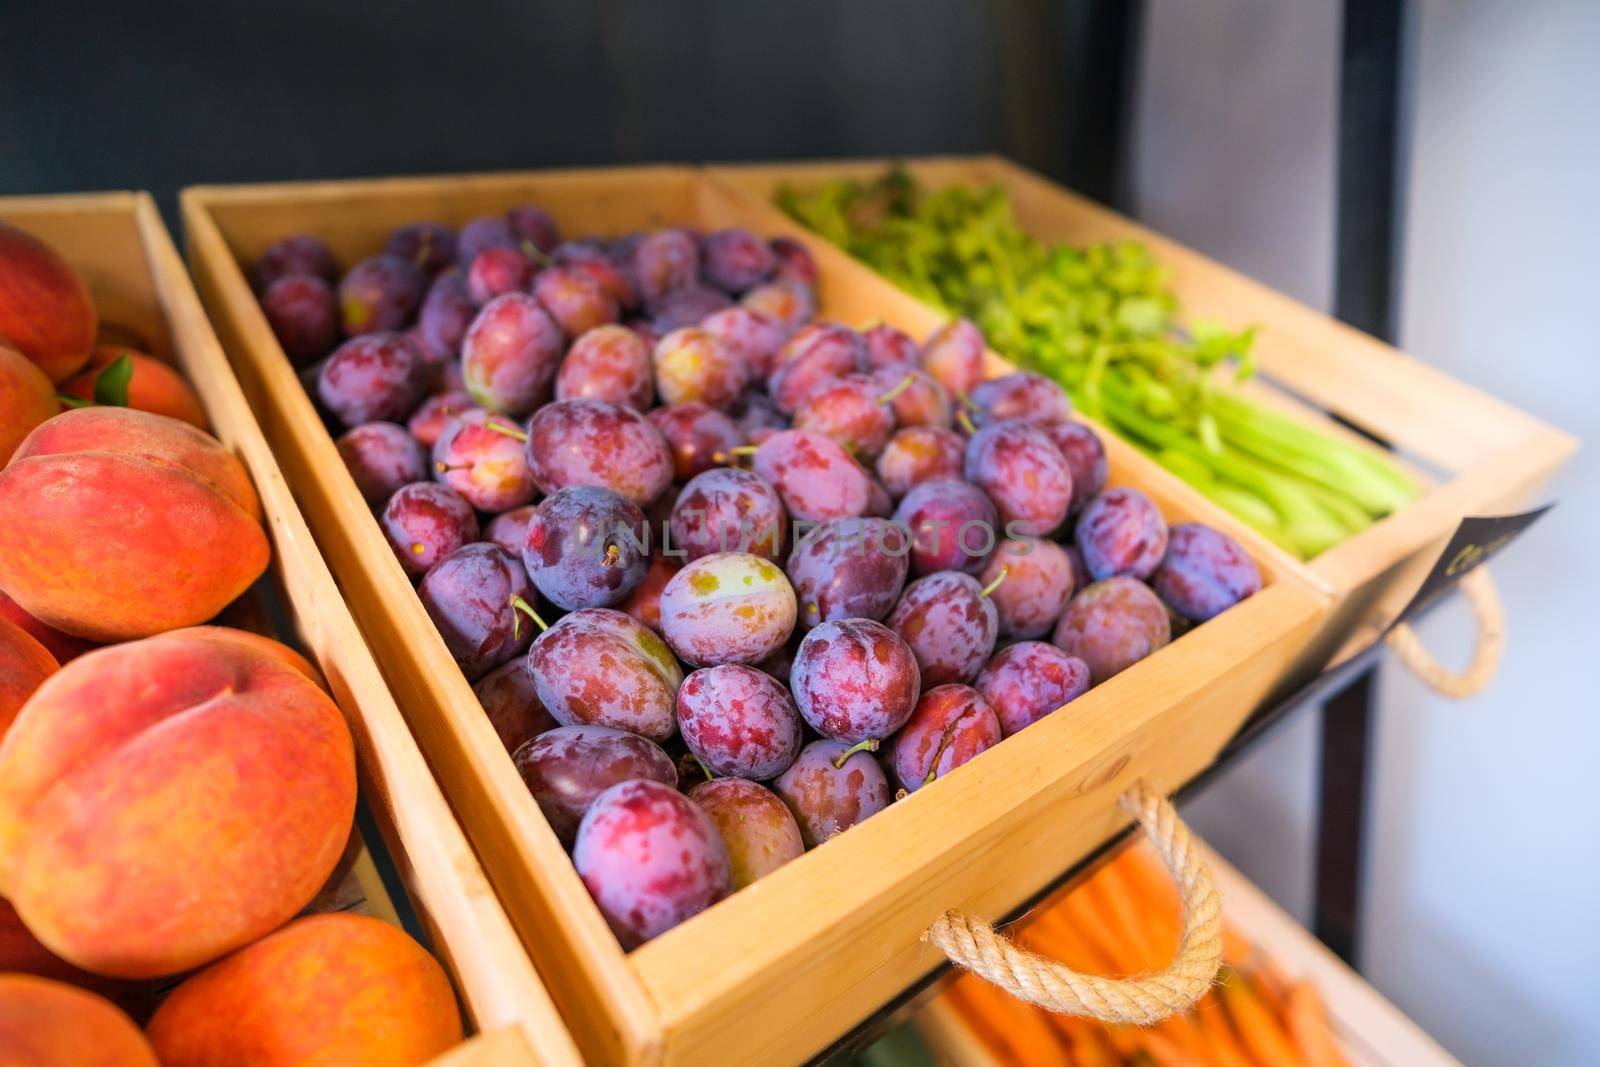 Healthy fruit and vegetables in grocery shop. Close up of basket with plums in supermarket.